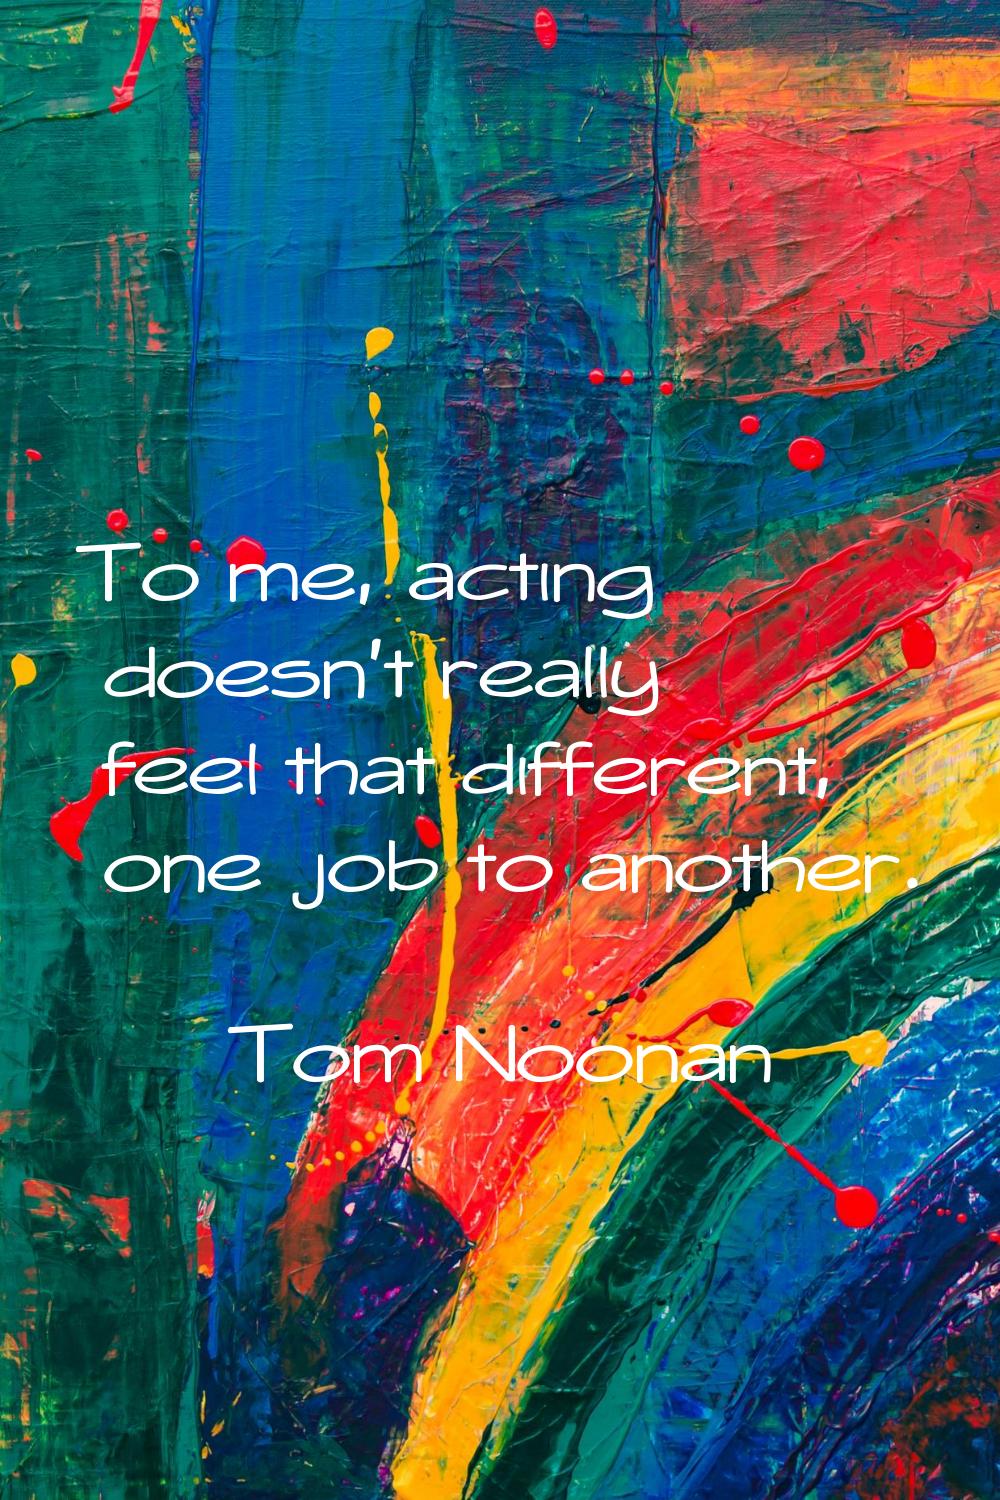 To me, acting doesn't really feel that different, one job to another.